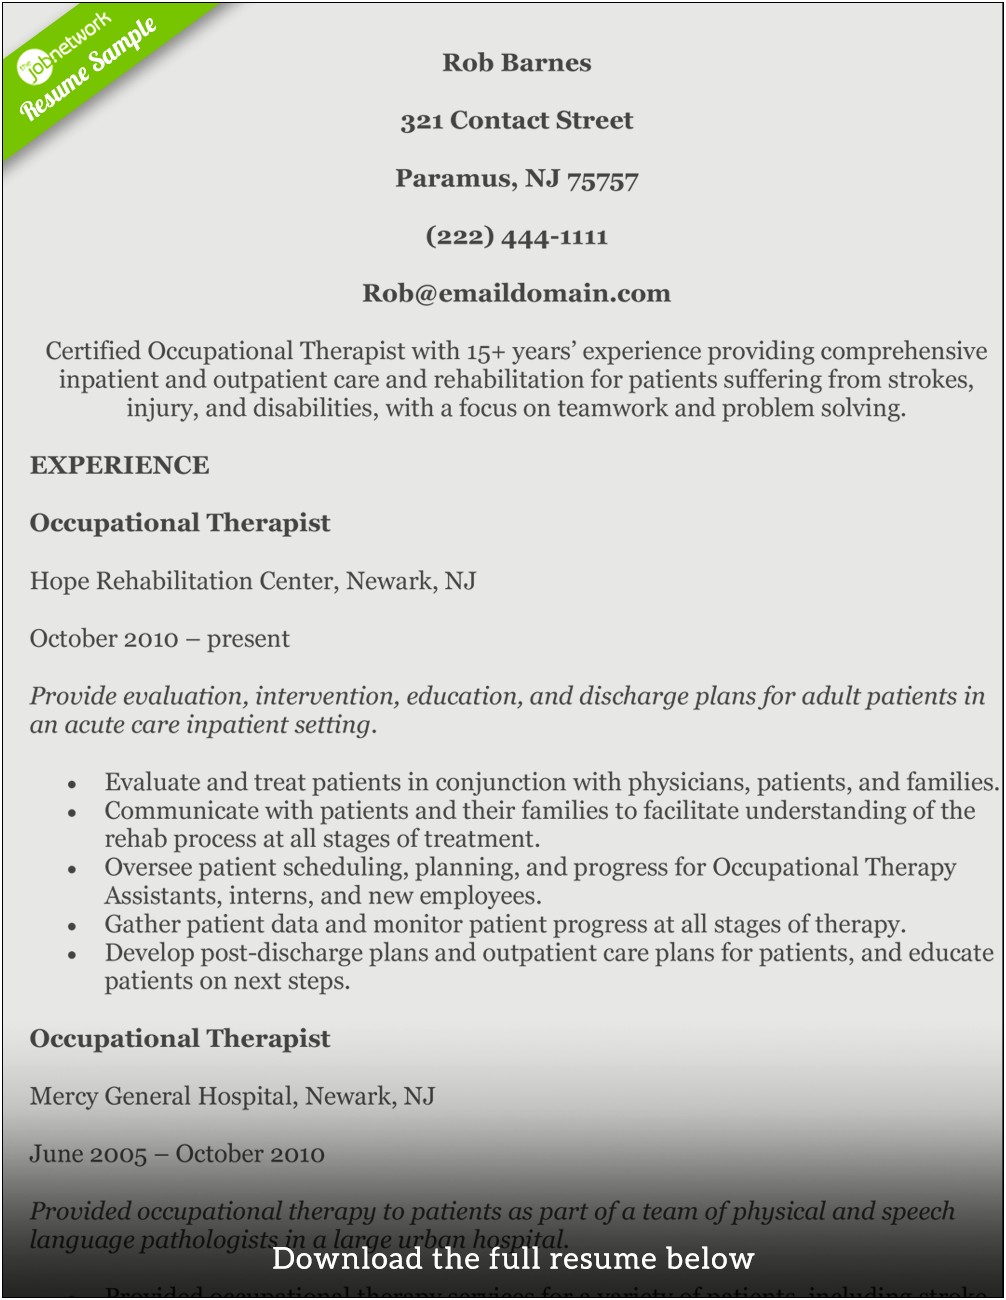 Cover Letter For Resume Occuaptional Therapy